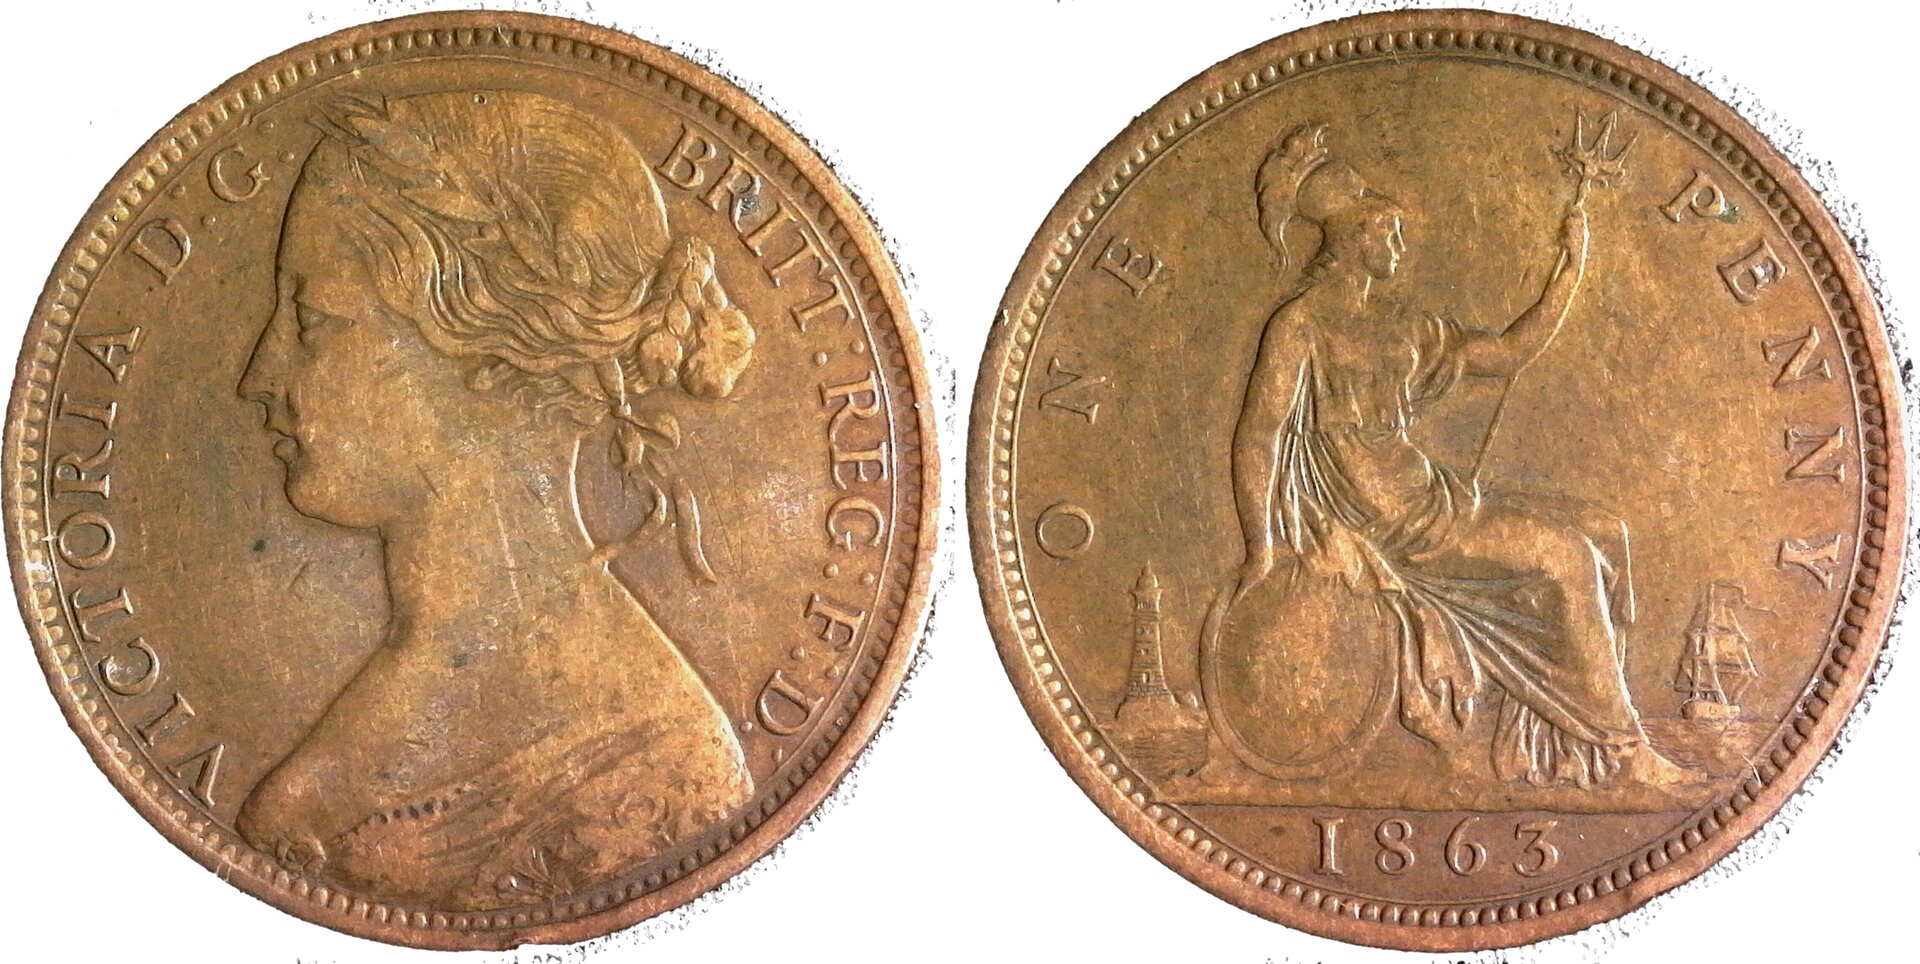 Great Britain One Penny 1863 Obverse-side-cutout.jpg